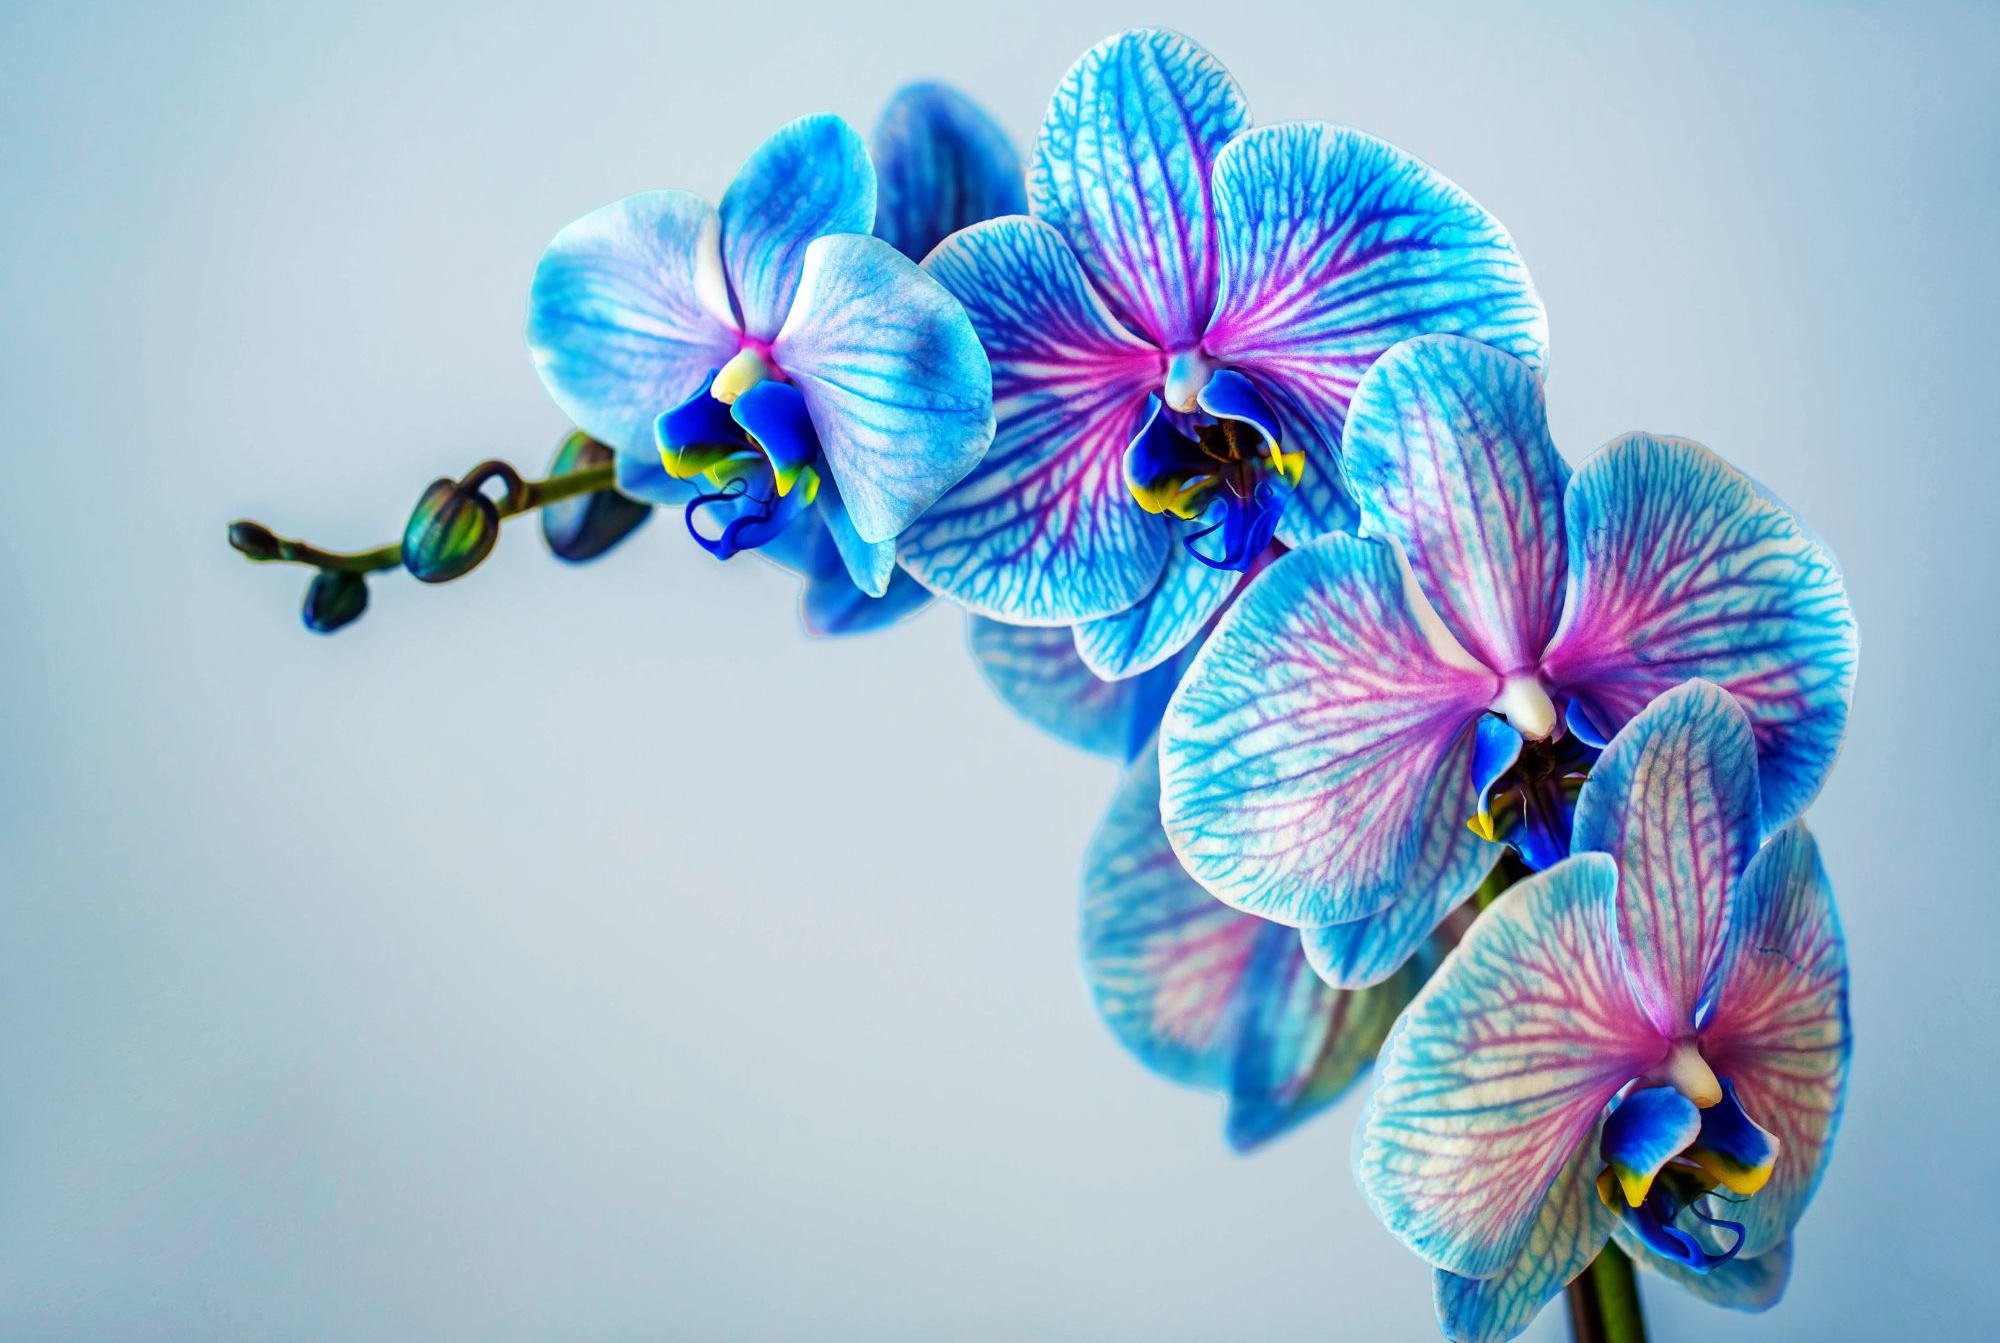 https://scitechdaily.com/images/Blue-Orchid.jpg